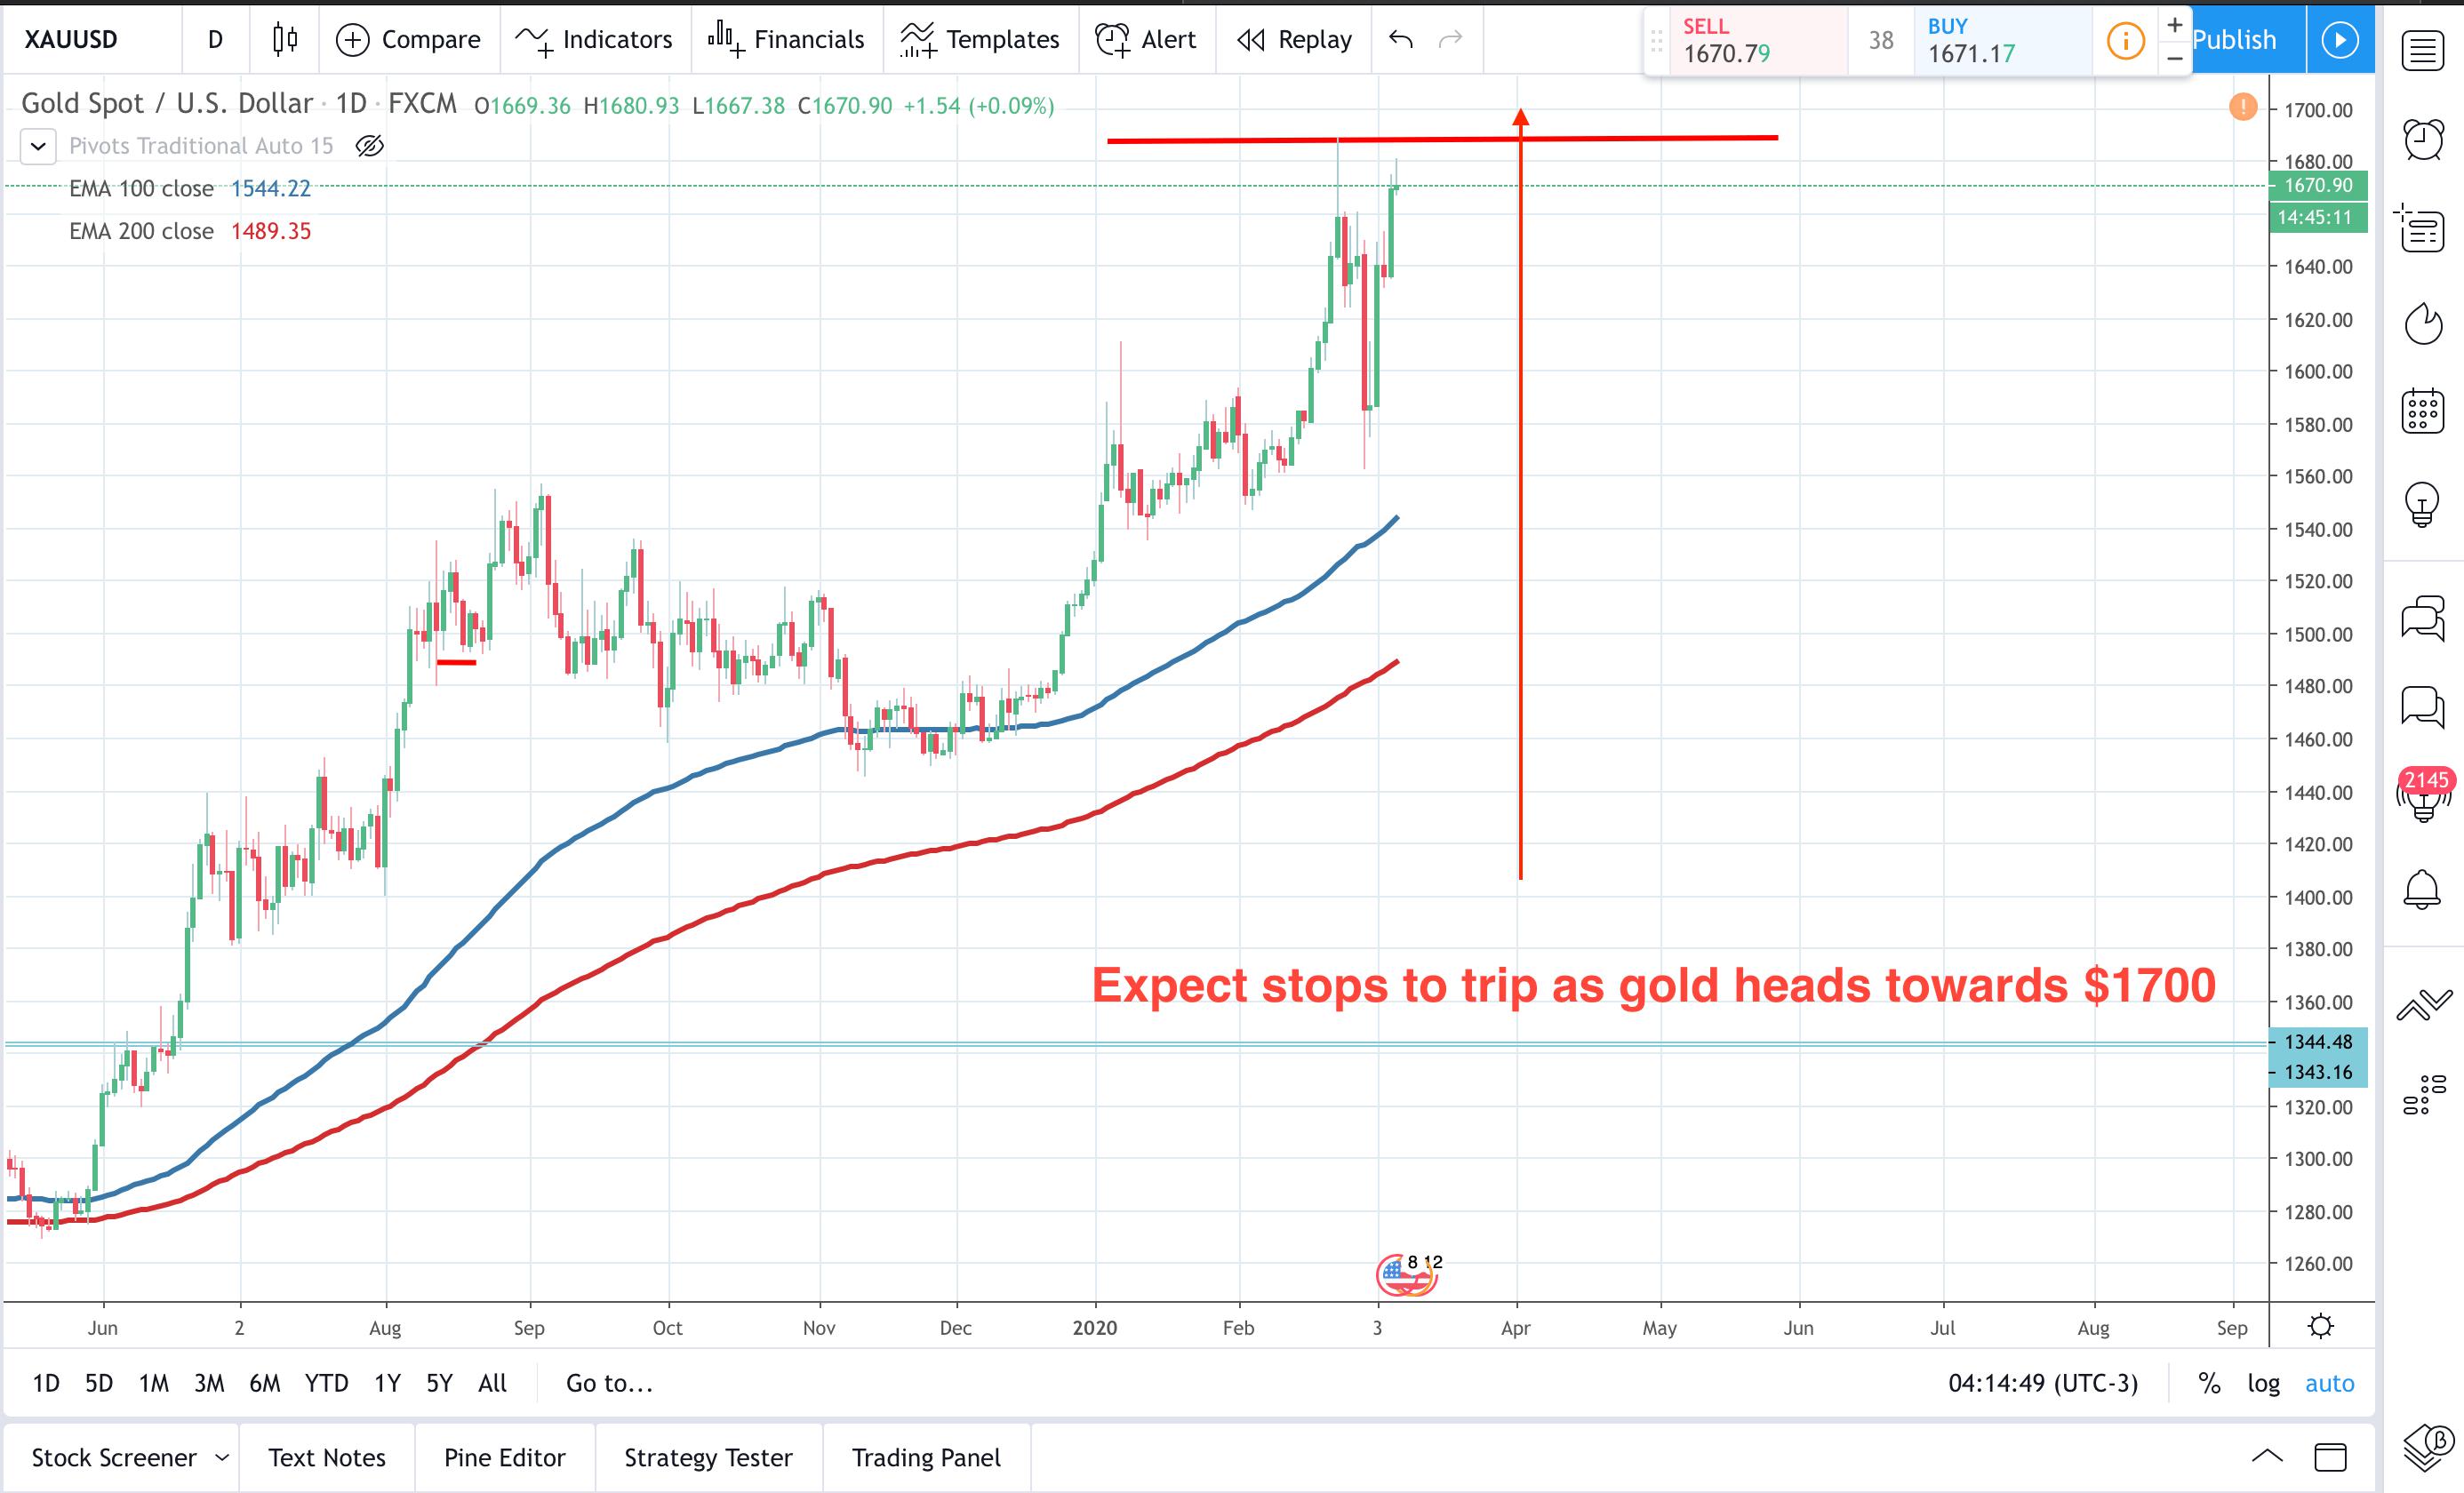 Gold and silver on their way up - what's to stop the move higher?